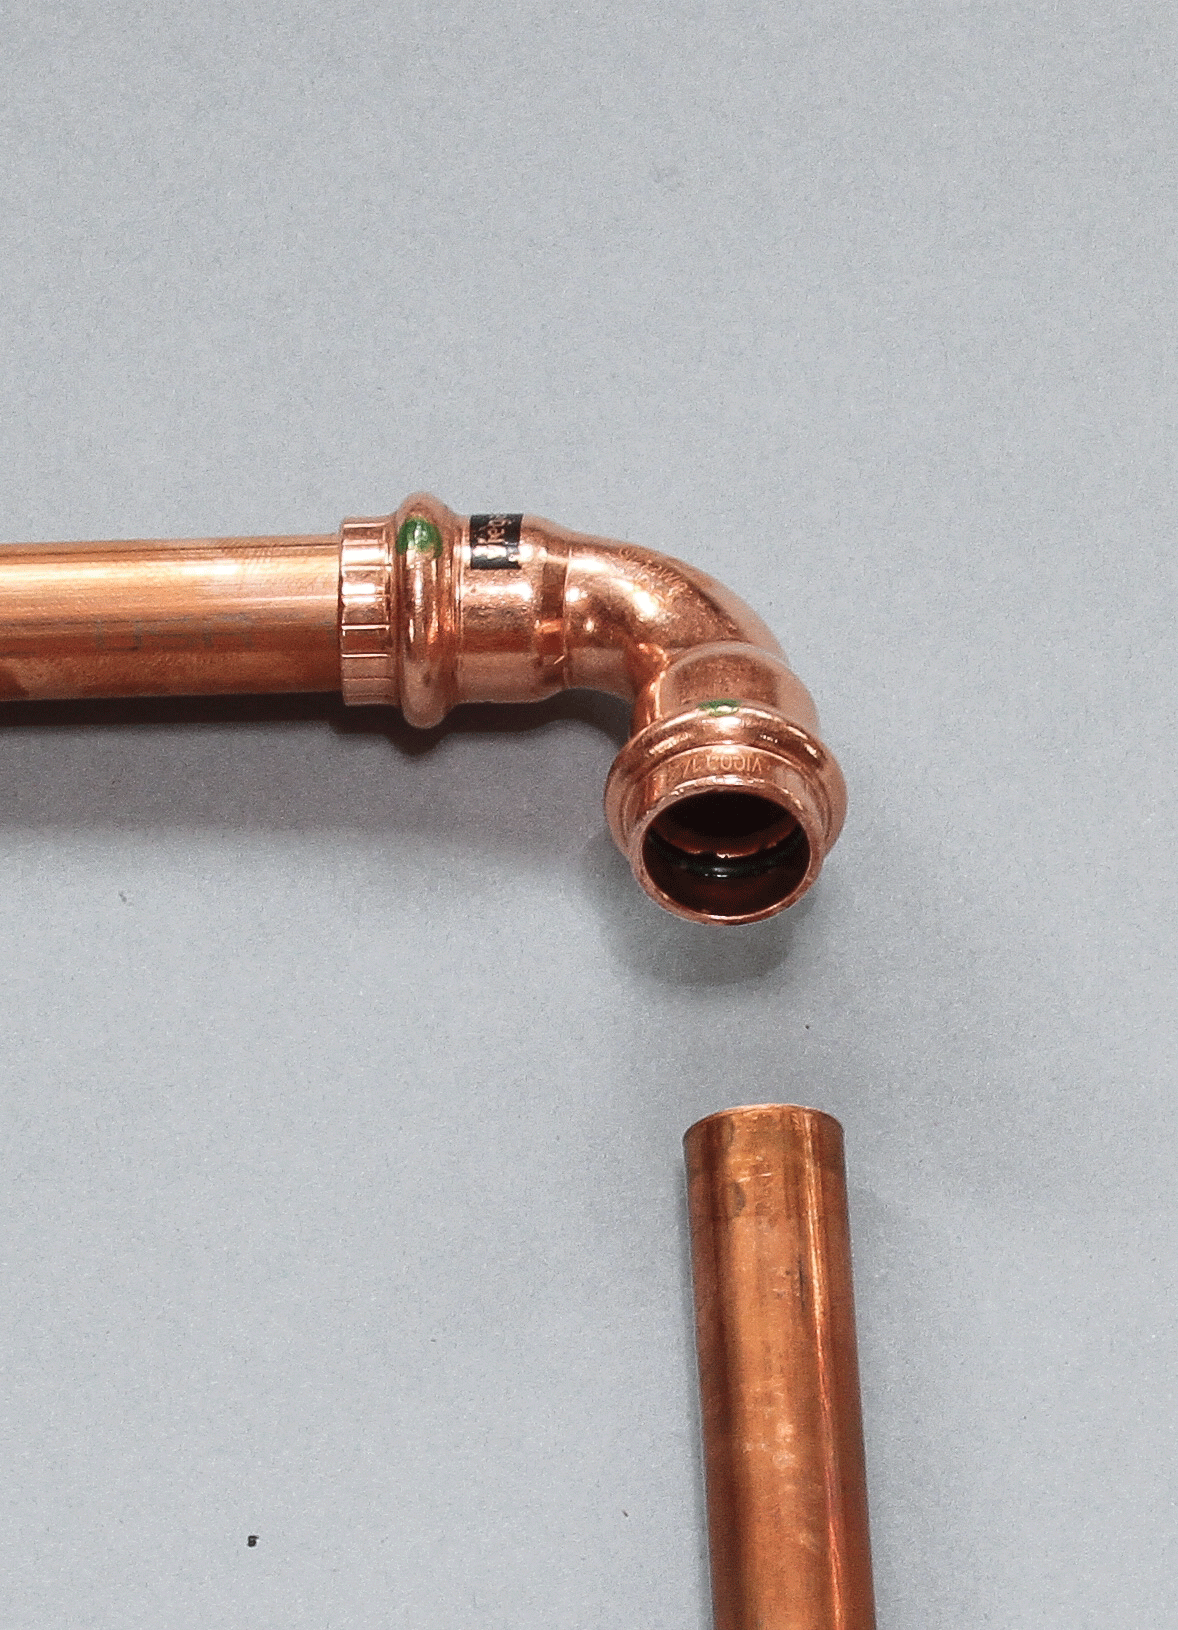 How to Solder Copper Pipe? - ElectronicsHub